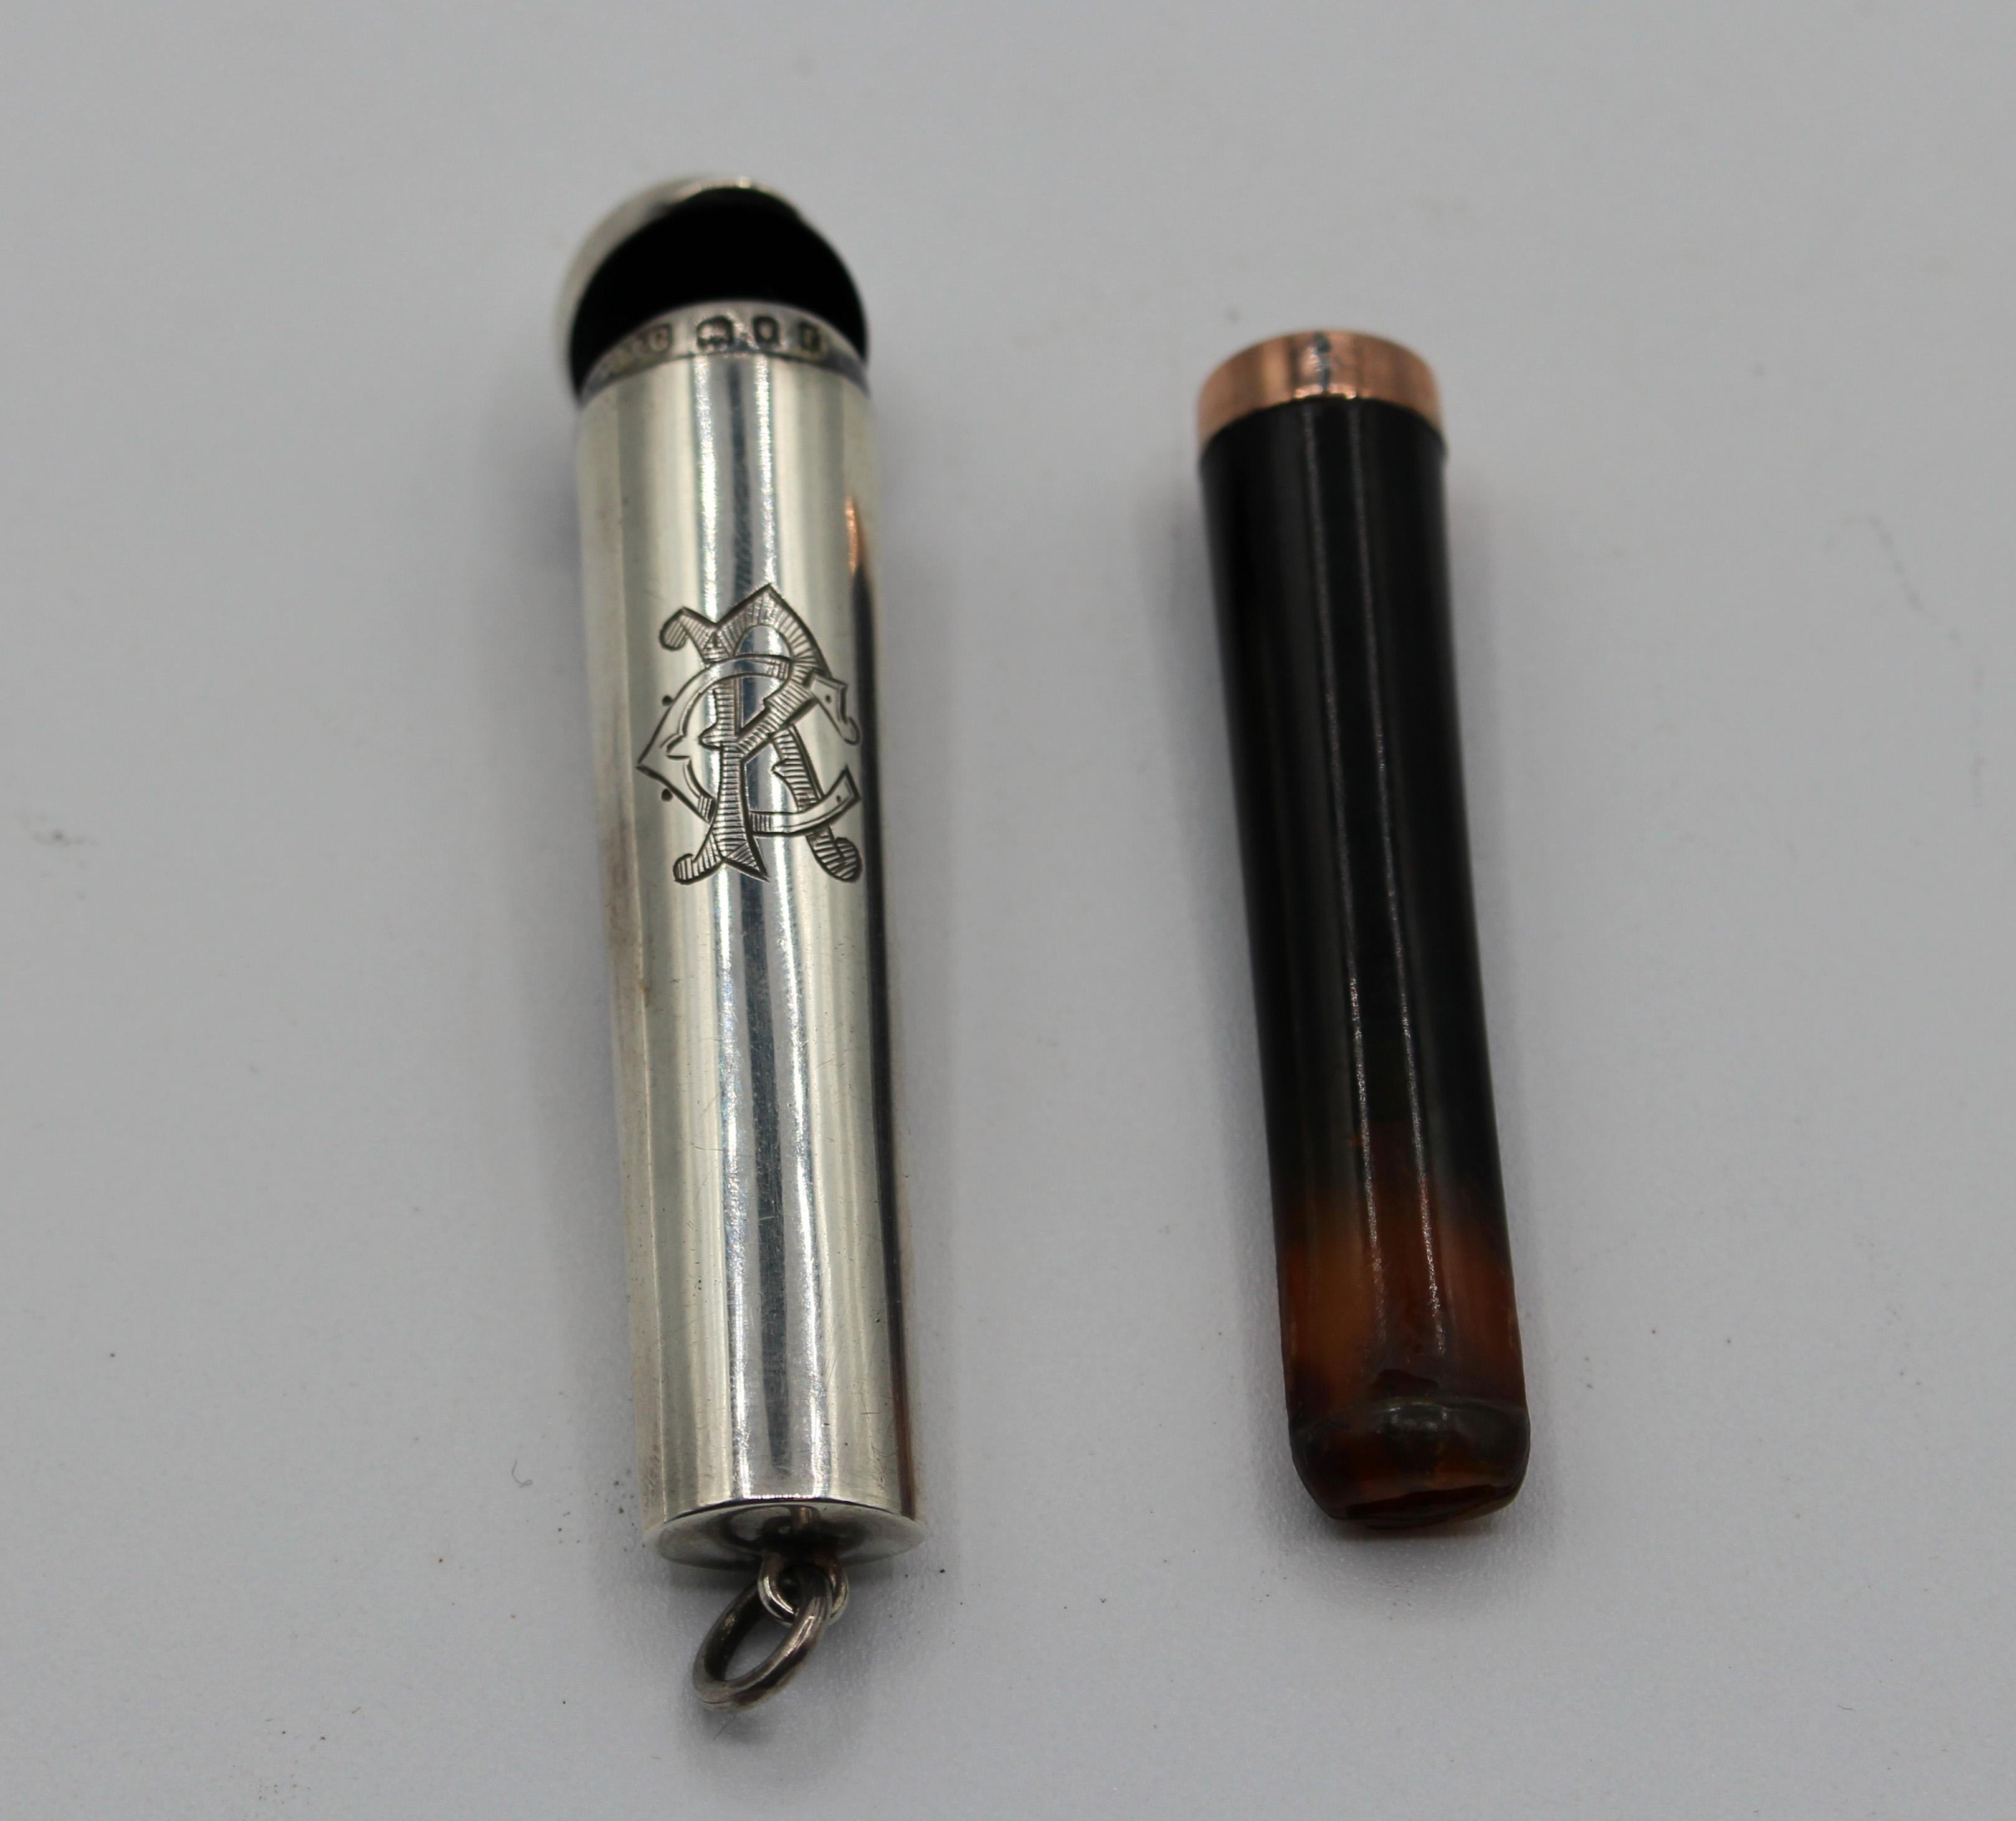 A stylish carved amber & gold cigarette holder, original sterling silver case. Made in 1920 in London by Albert Cohen & Charles, Thavies Inn, Holborn Circus. Period monogram. 